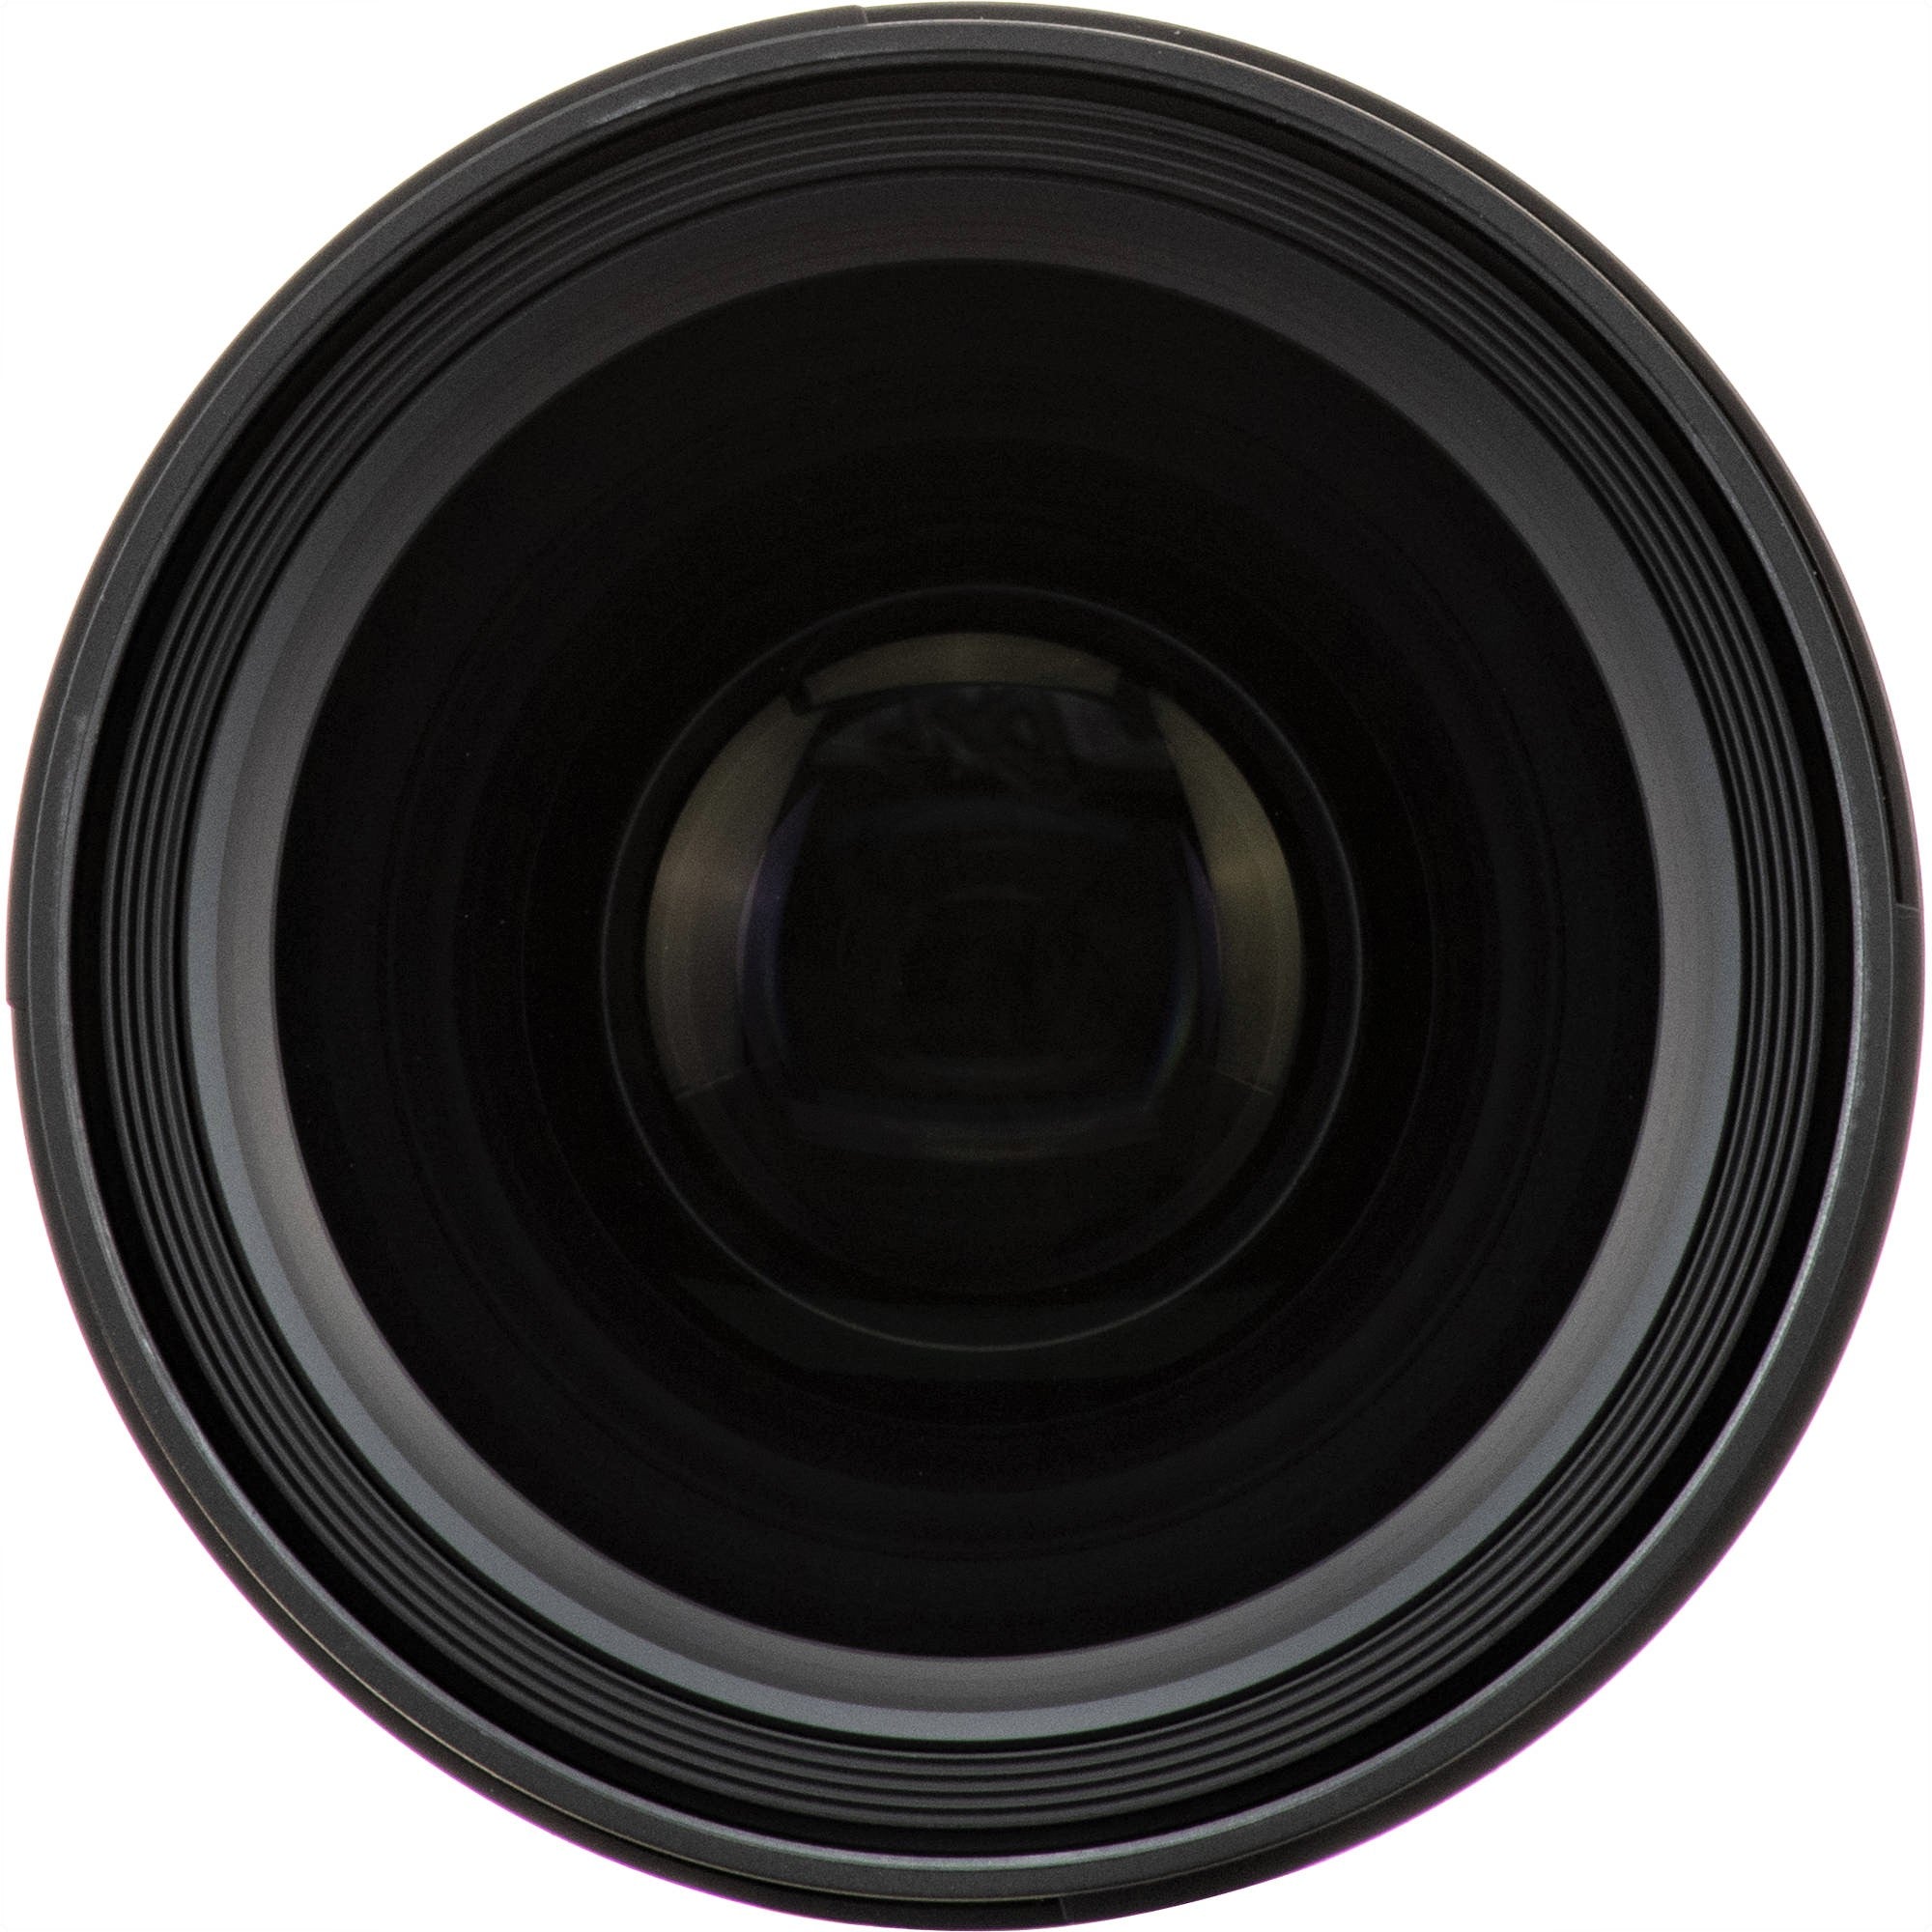 Sigma 40mm F1.4 DG HSM Art Lens for Sony E in a Front Close-Up View